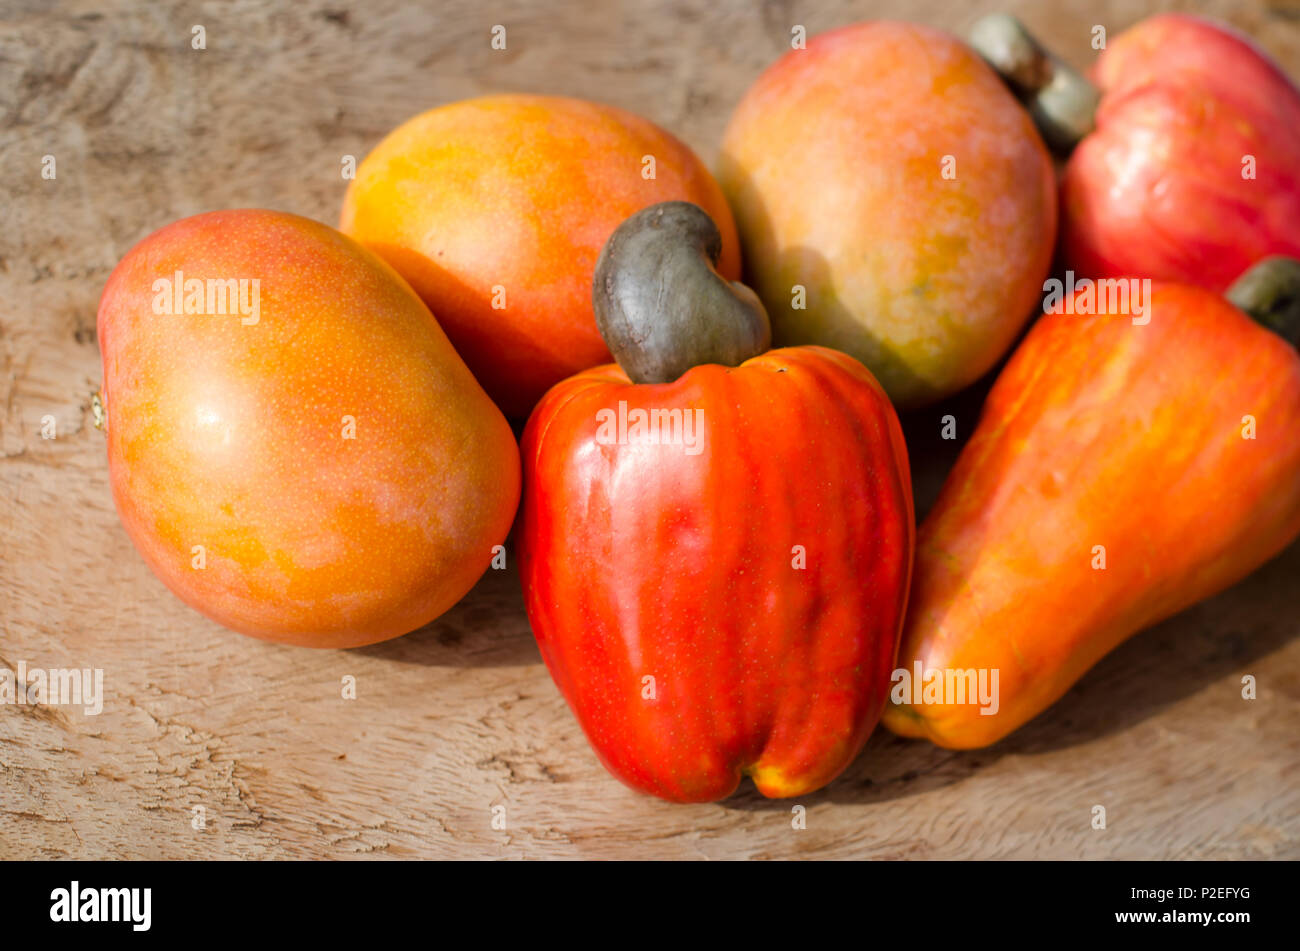 Cashew apples and mangoes Stock Photo